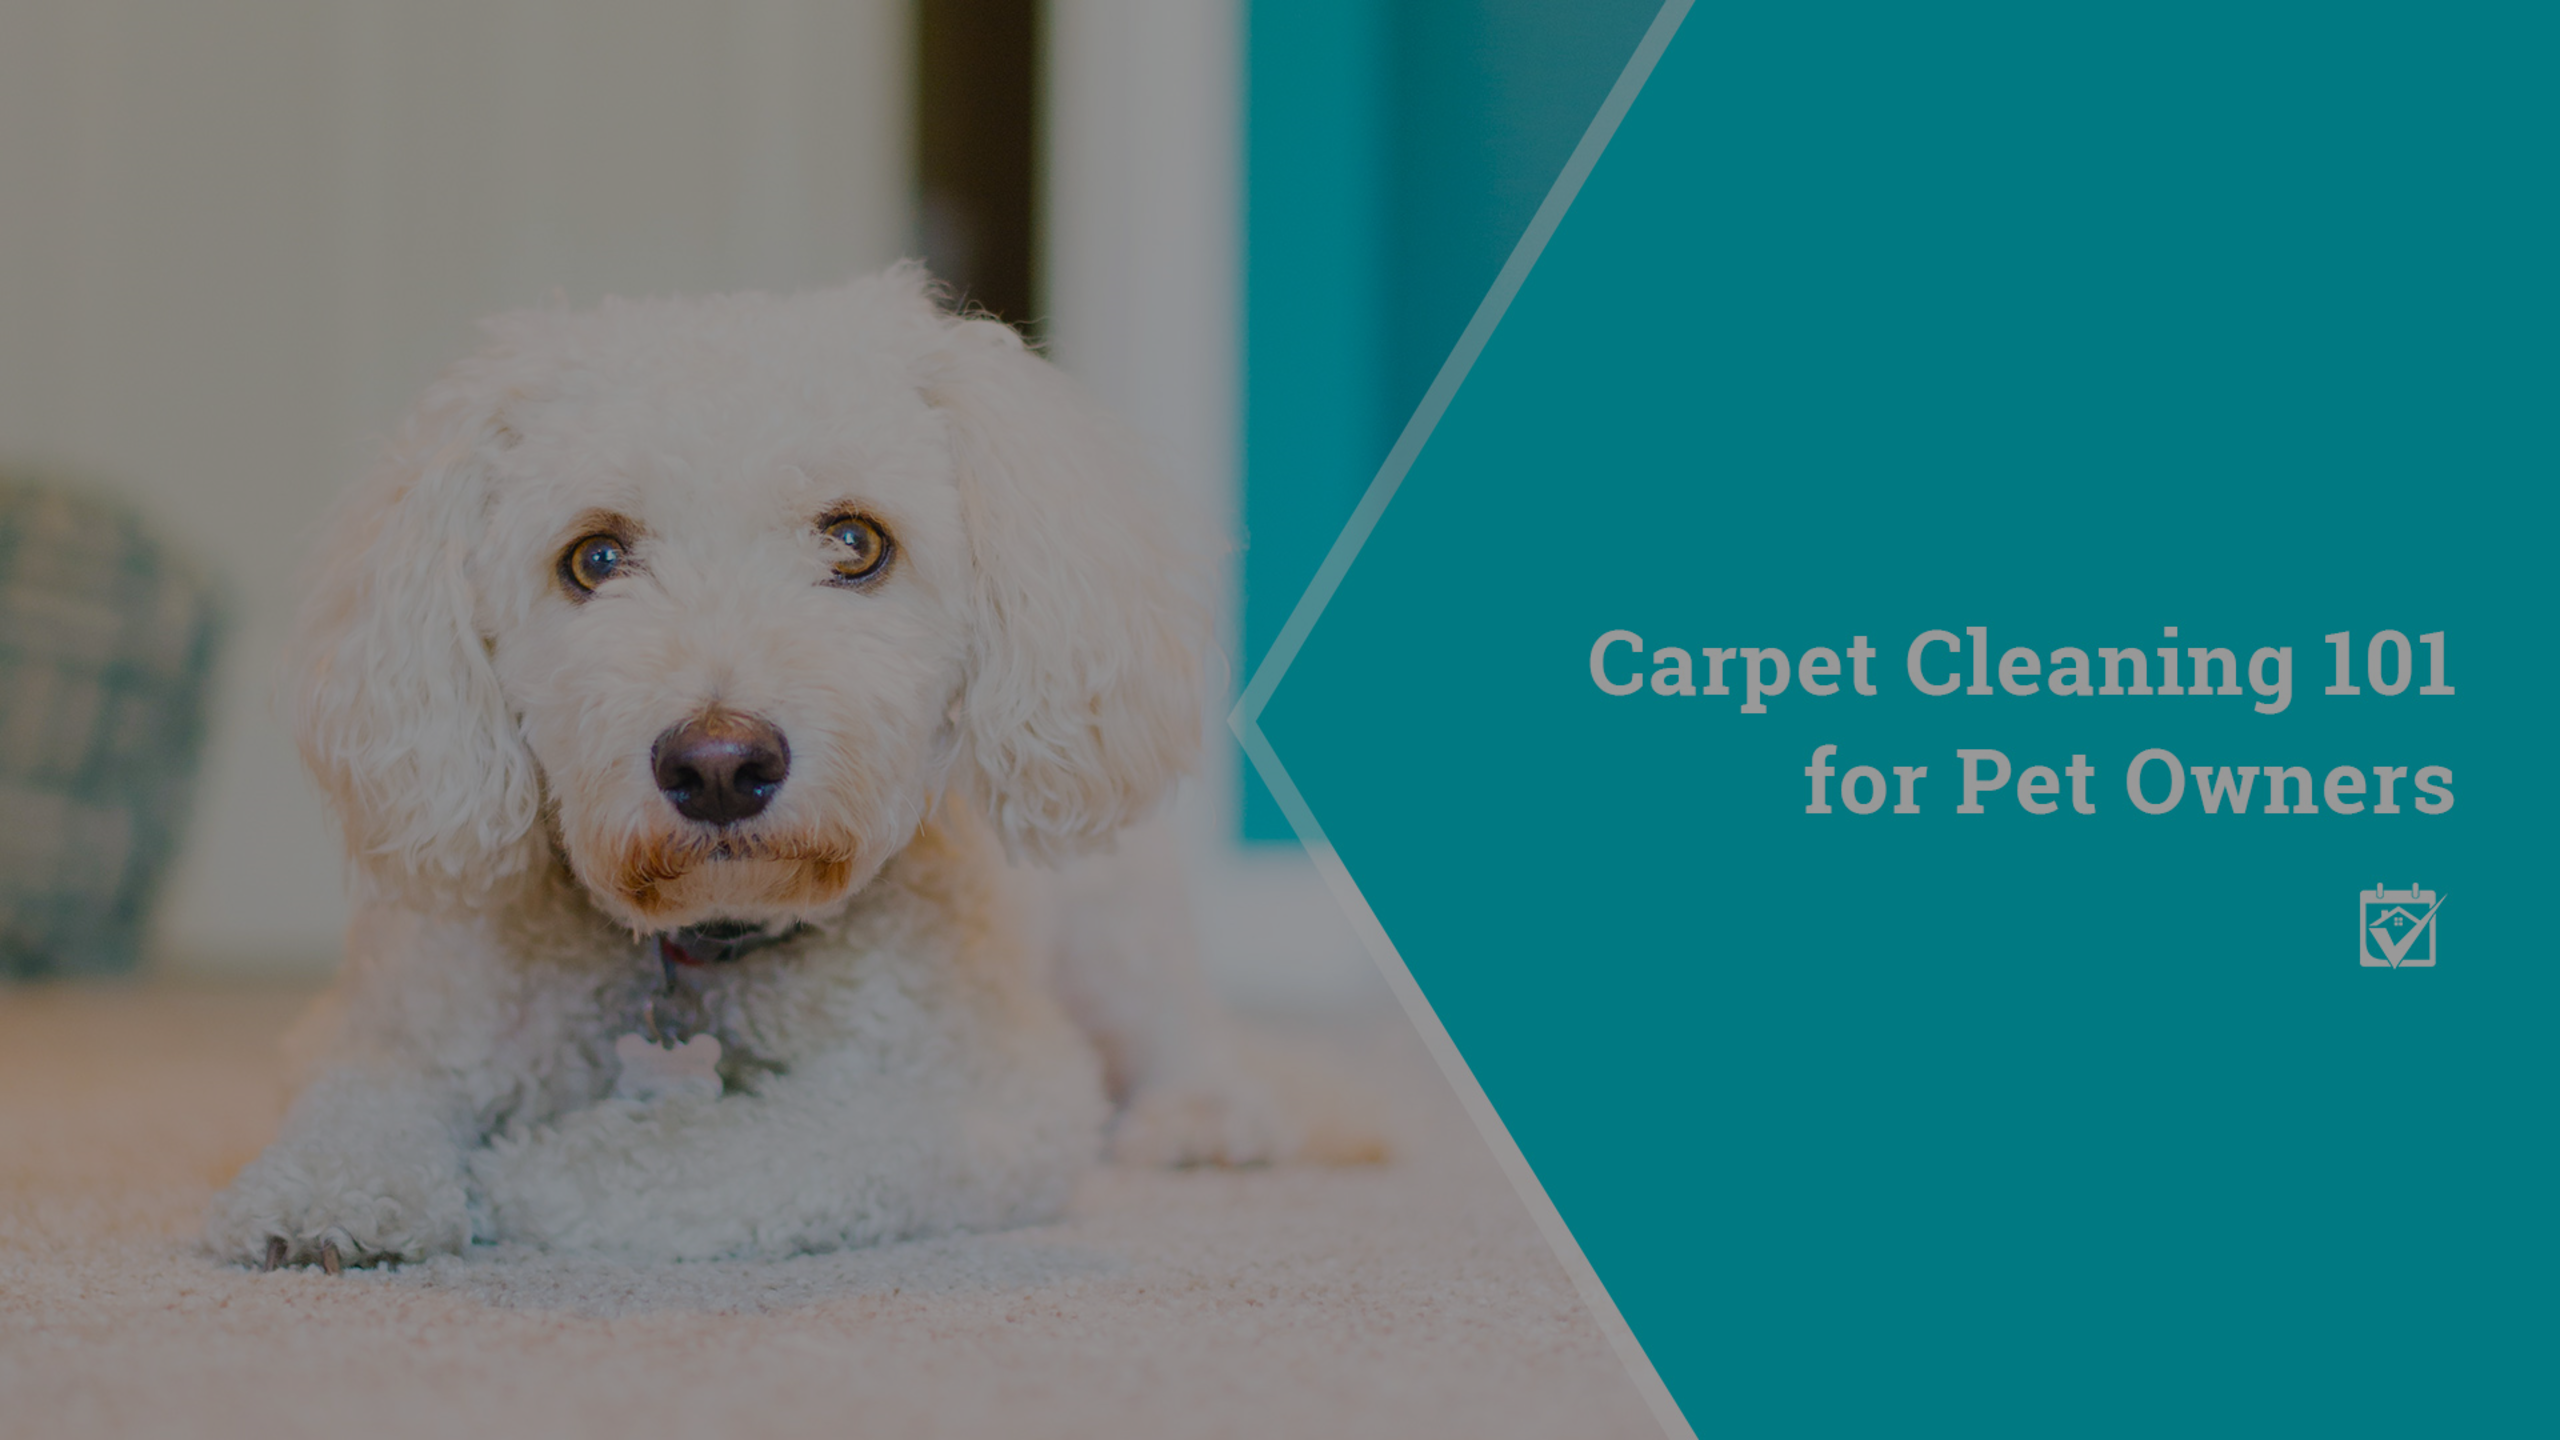 Carpet Cleaning 101 for Pet Owners